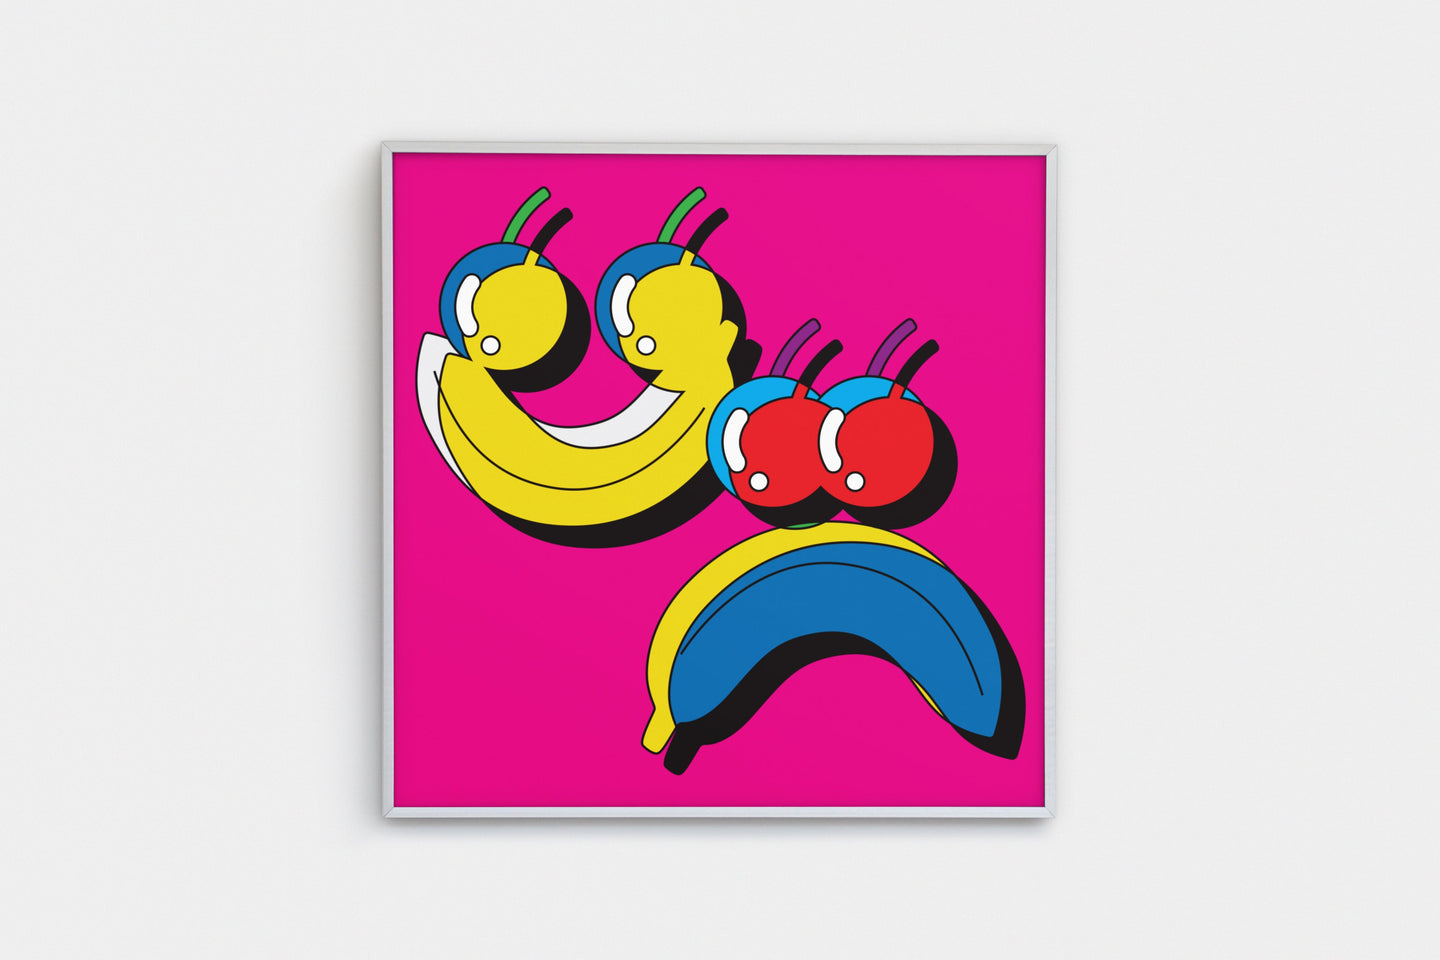 The Never Ending Cherry and Banana (Pink Edition)